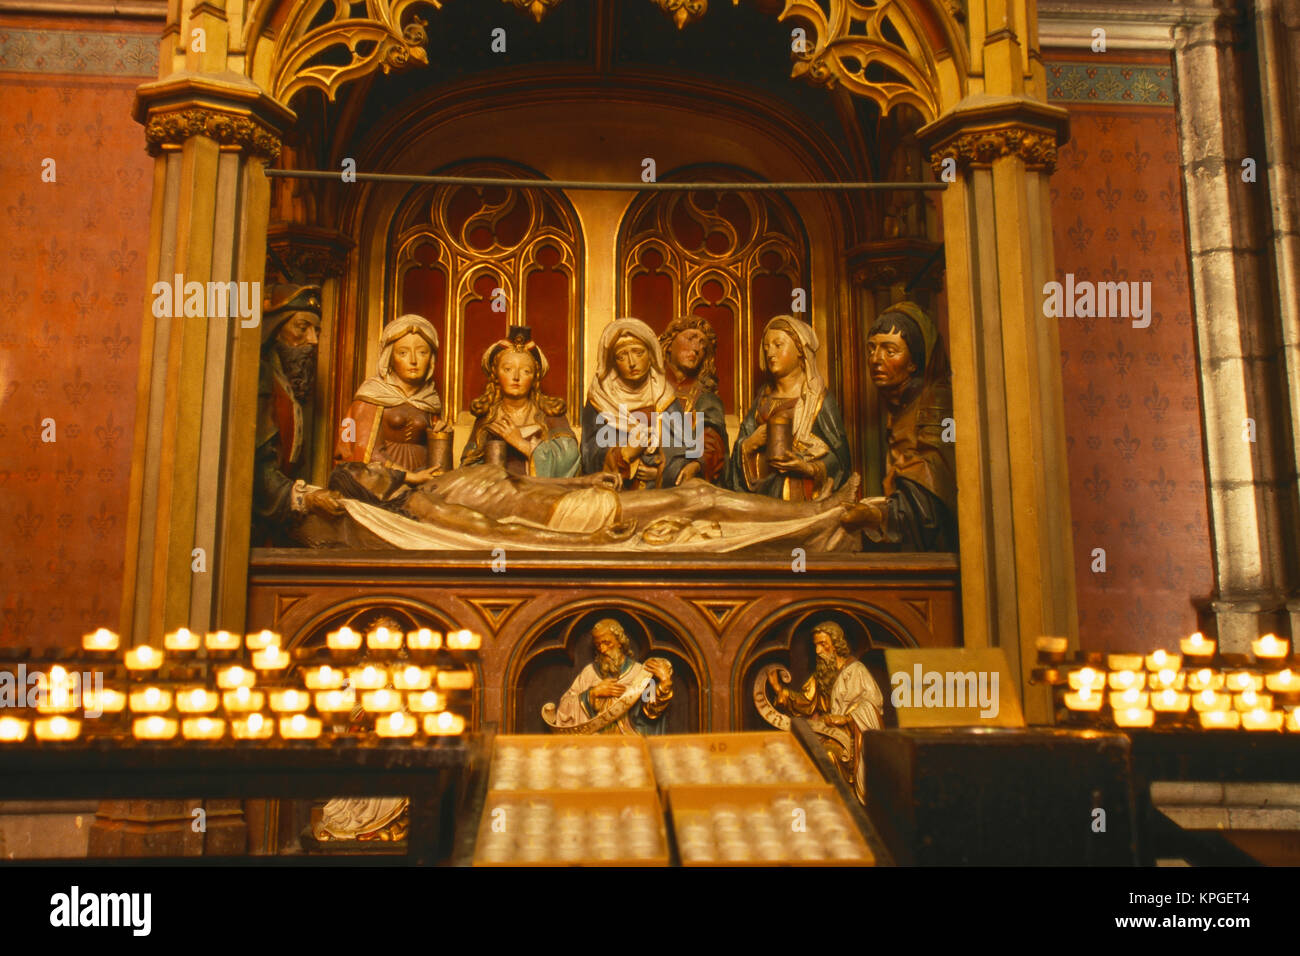 Germany, Cologne (Koln), interior of Cologne Cathedral (Kolner Dom), a UNESCO World Heritage Site. Stock Photo